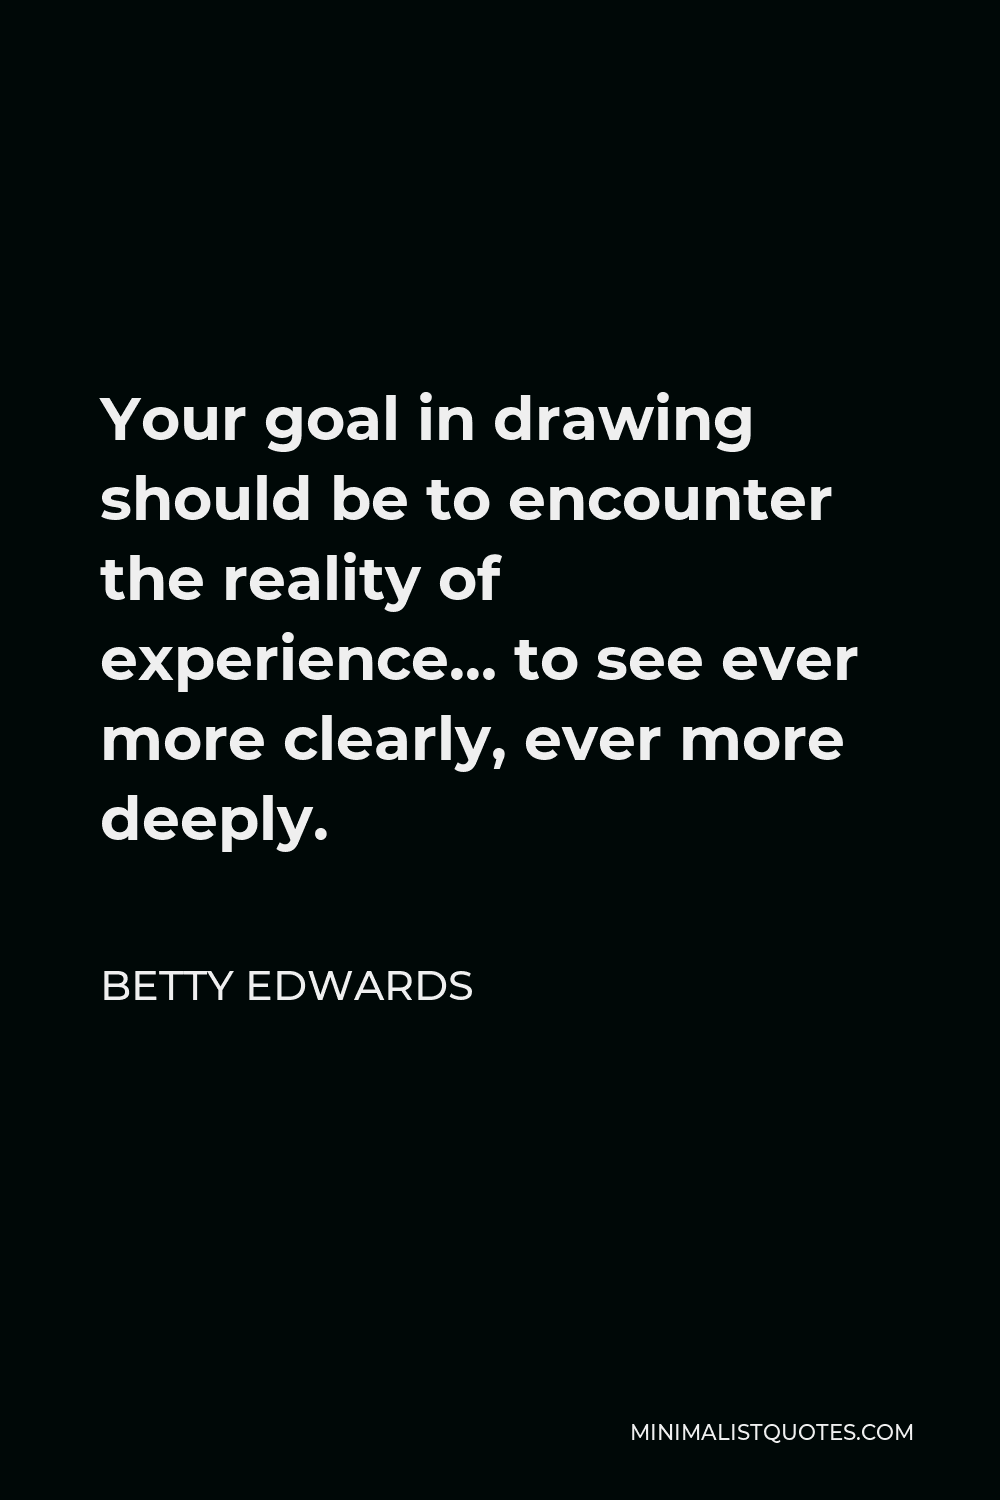 Betty Edwards Quote - Your goal in drawing should be to encounter the reality of experience… to see ever more clearly, ever more deeply.